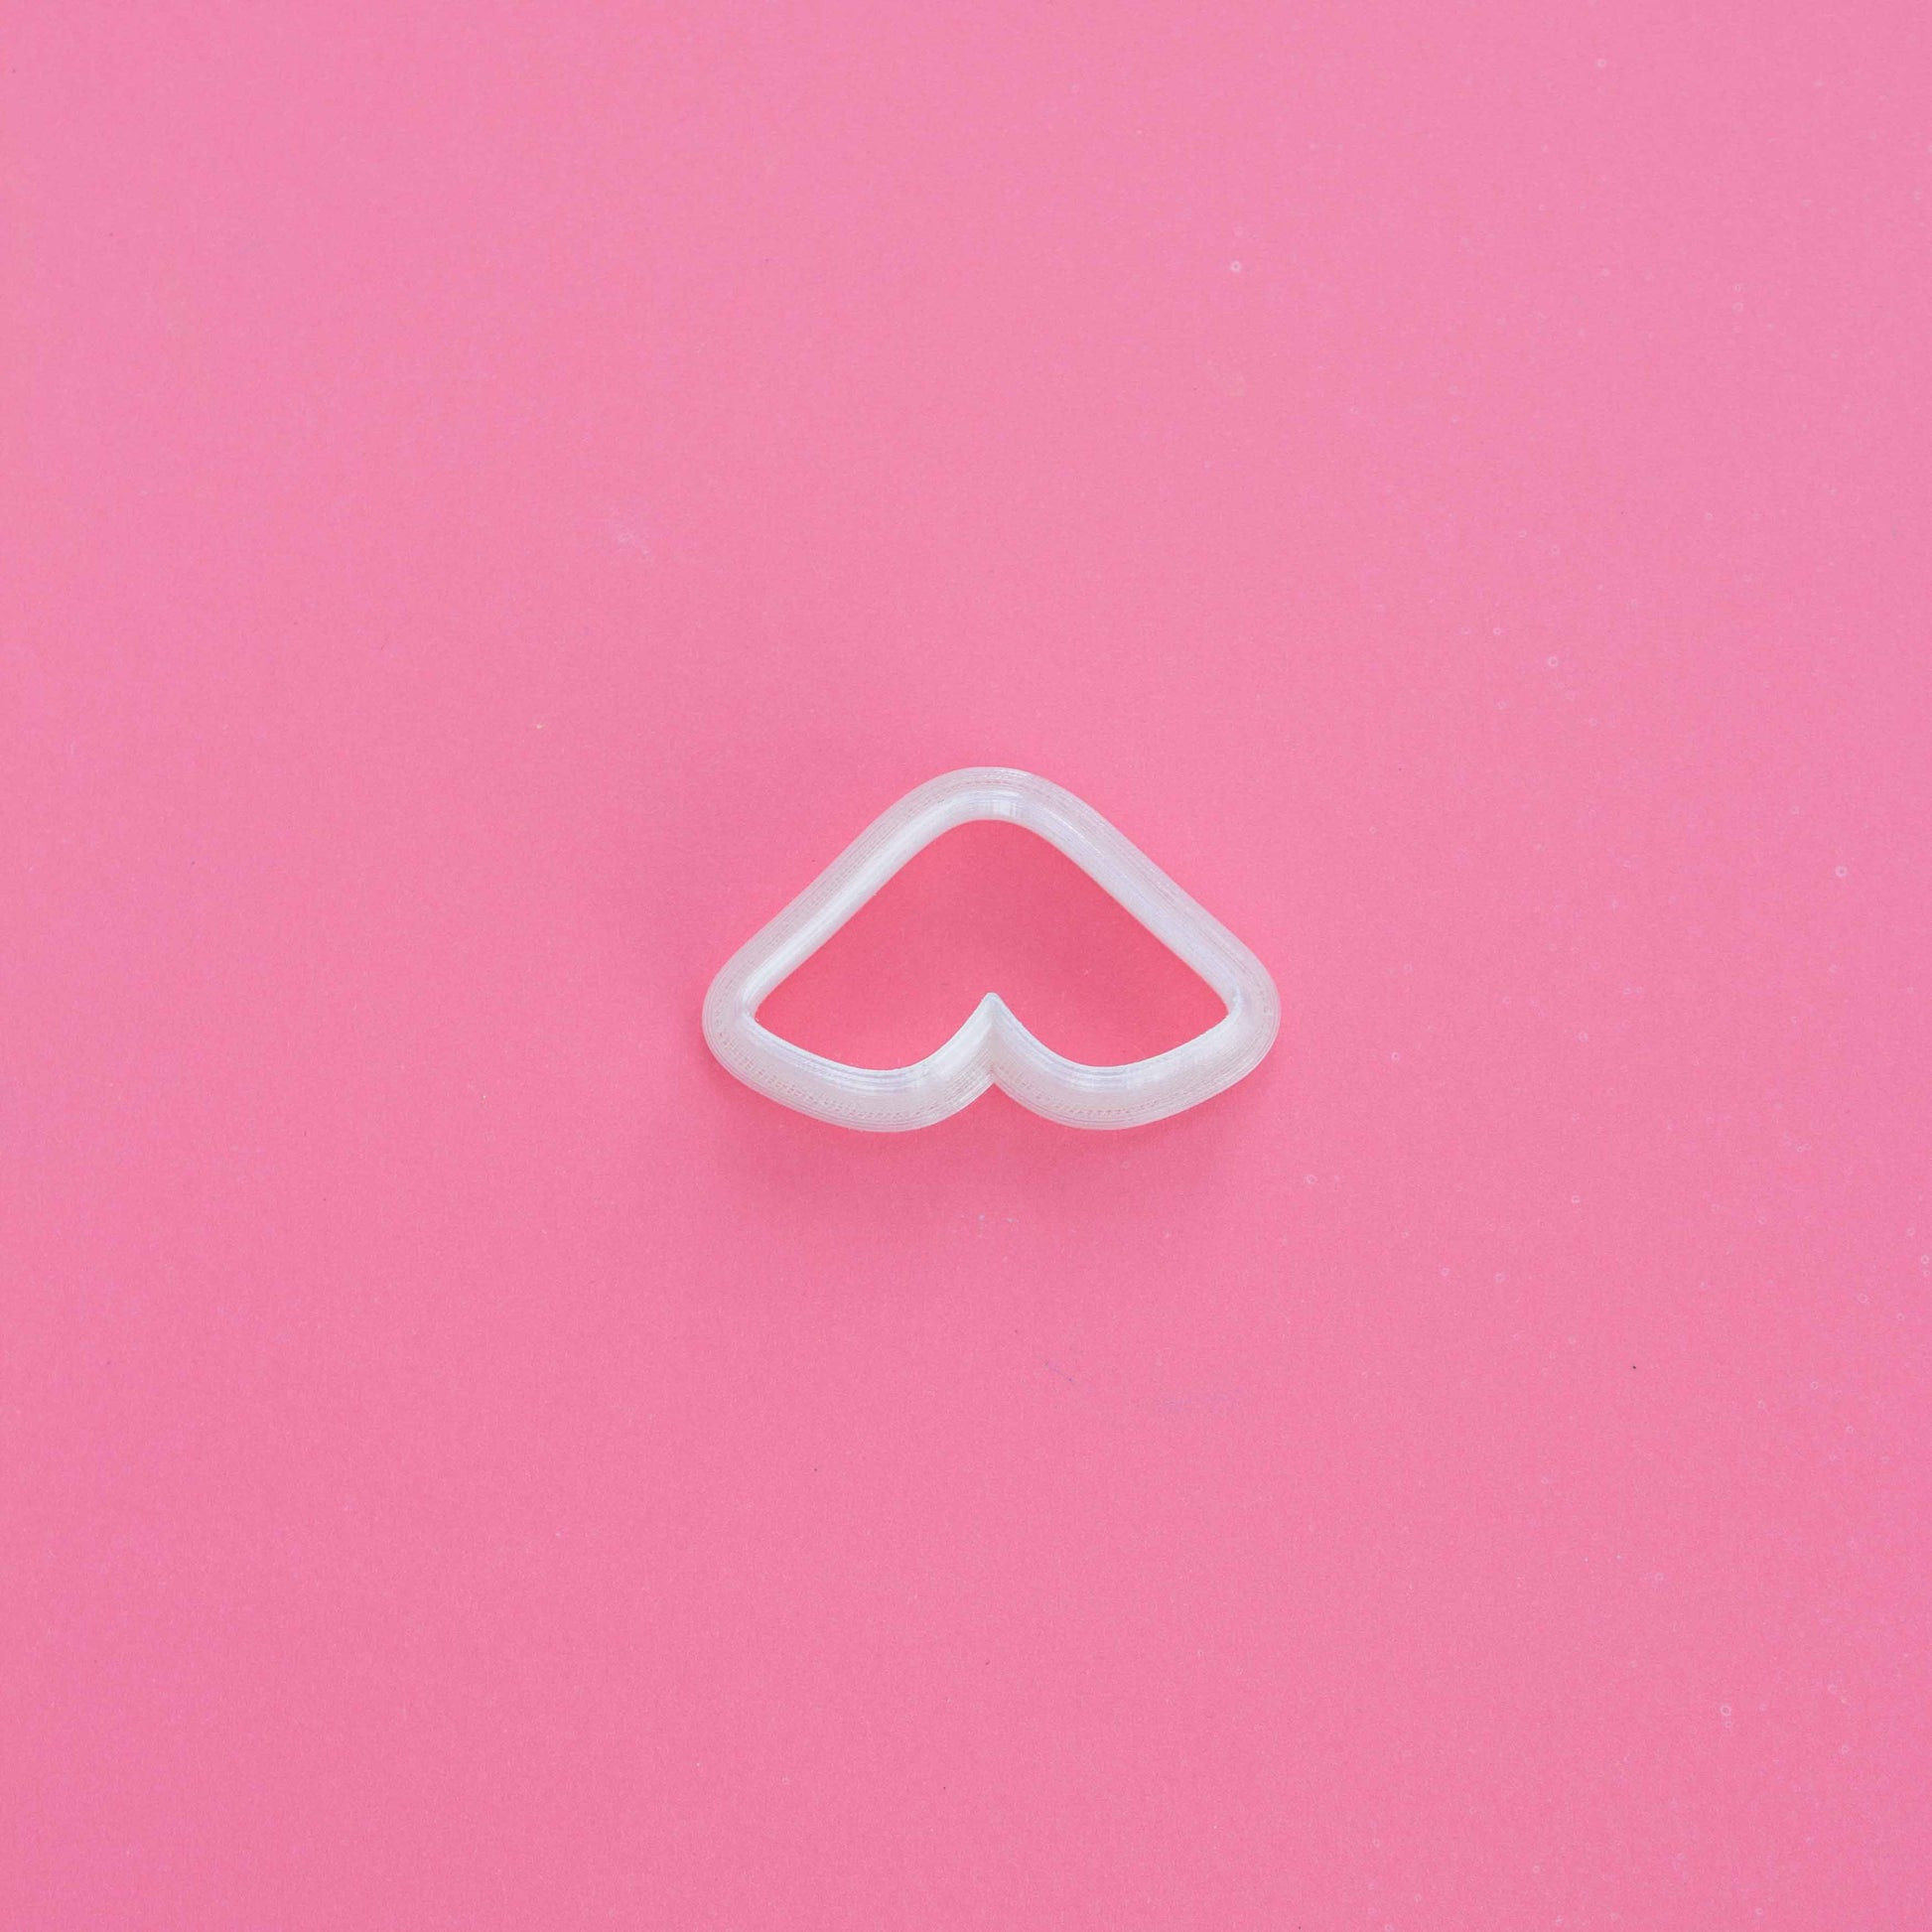 Double leaf clay cutter on a pink background.